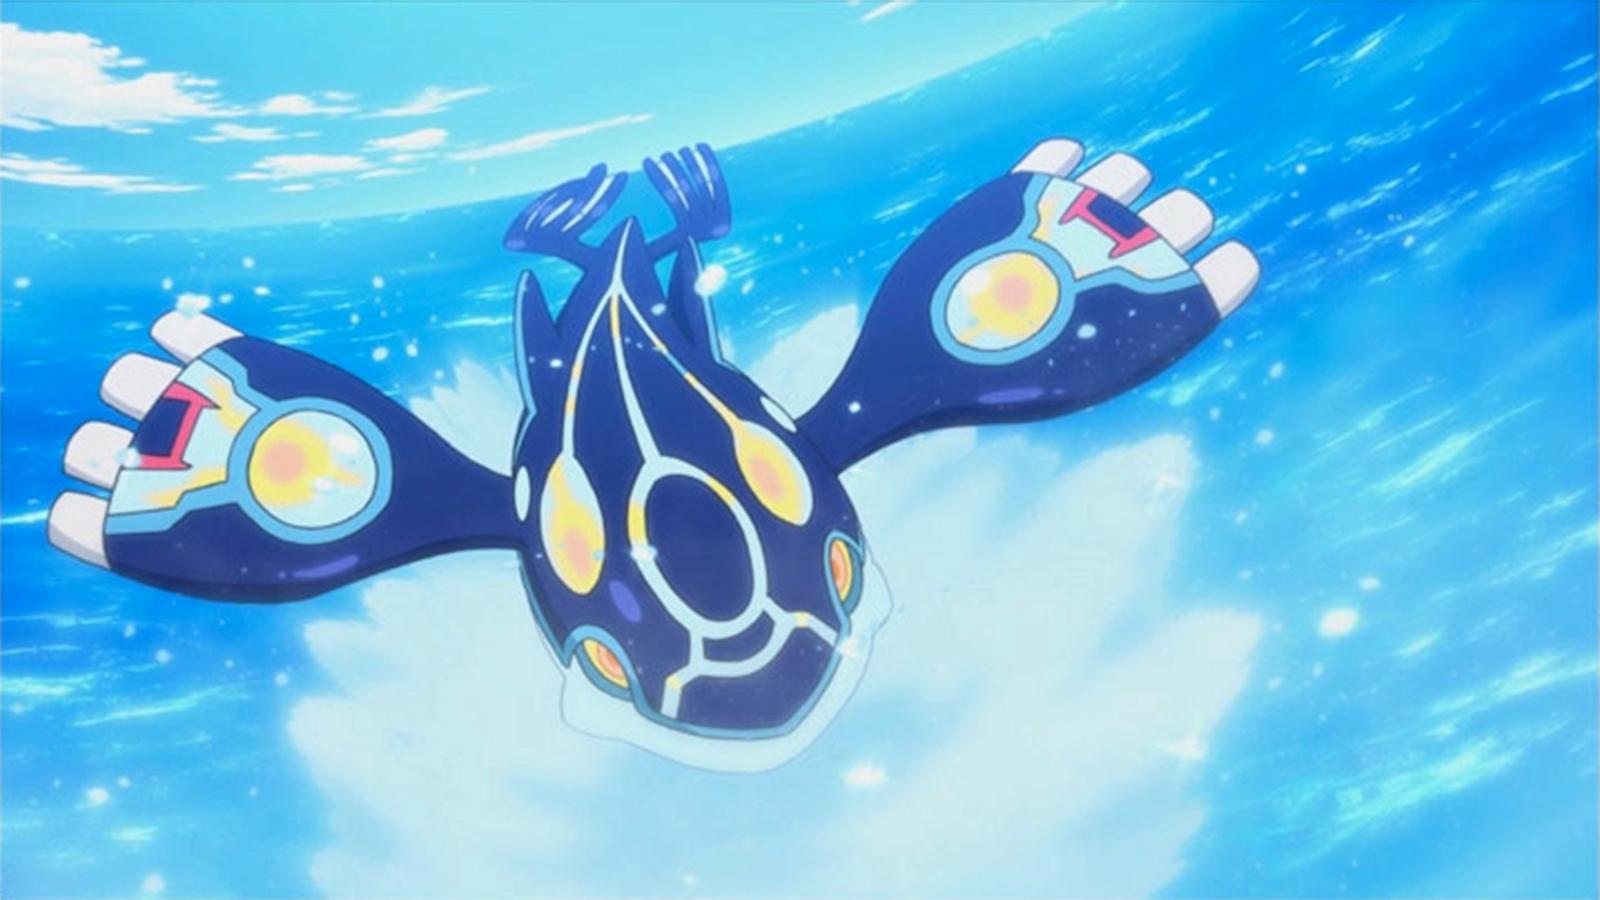 The Water-type Kyogre in the Pokemon anime